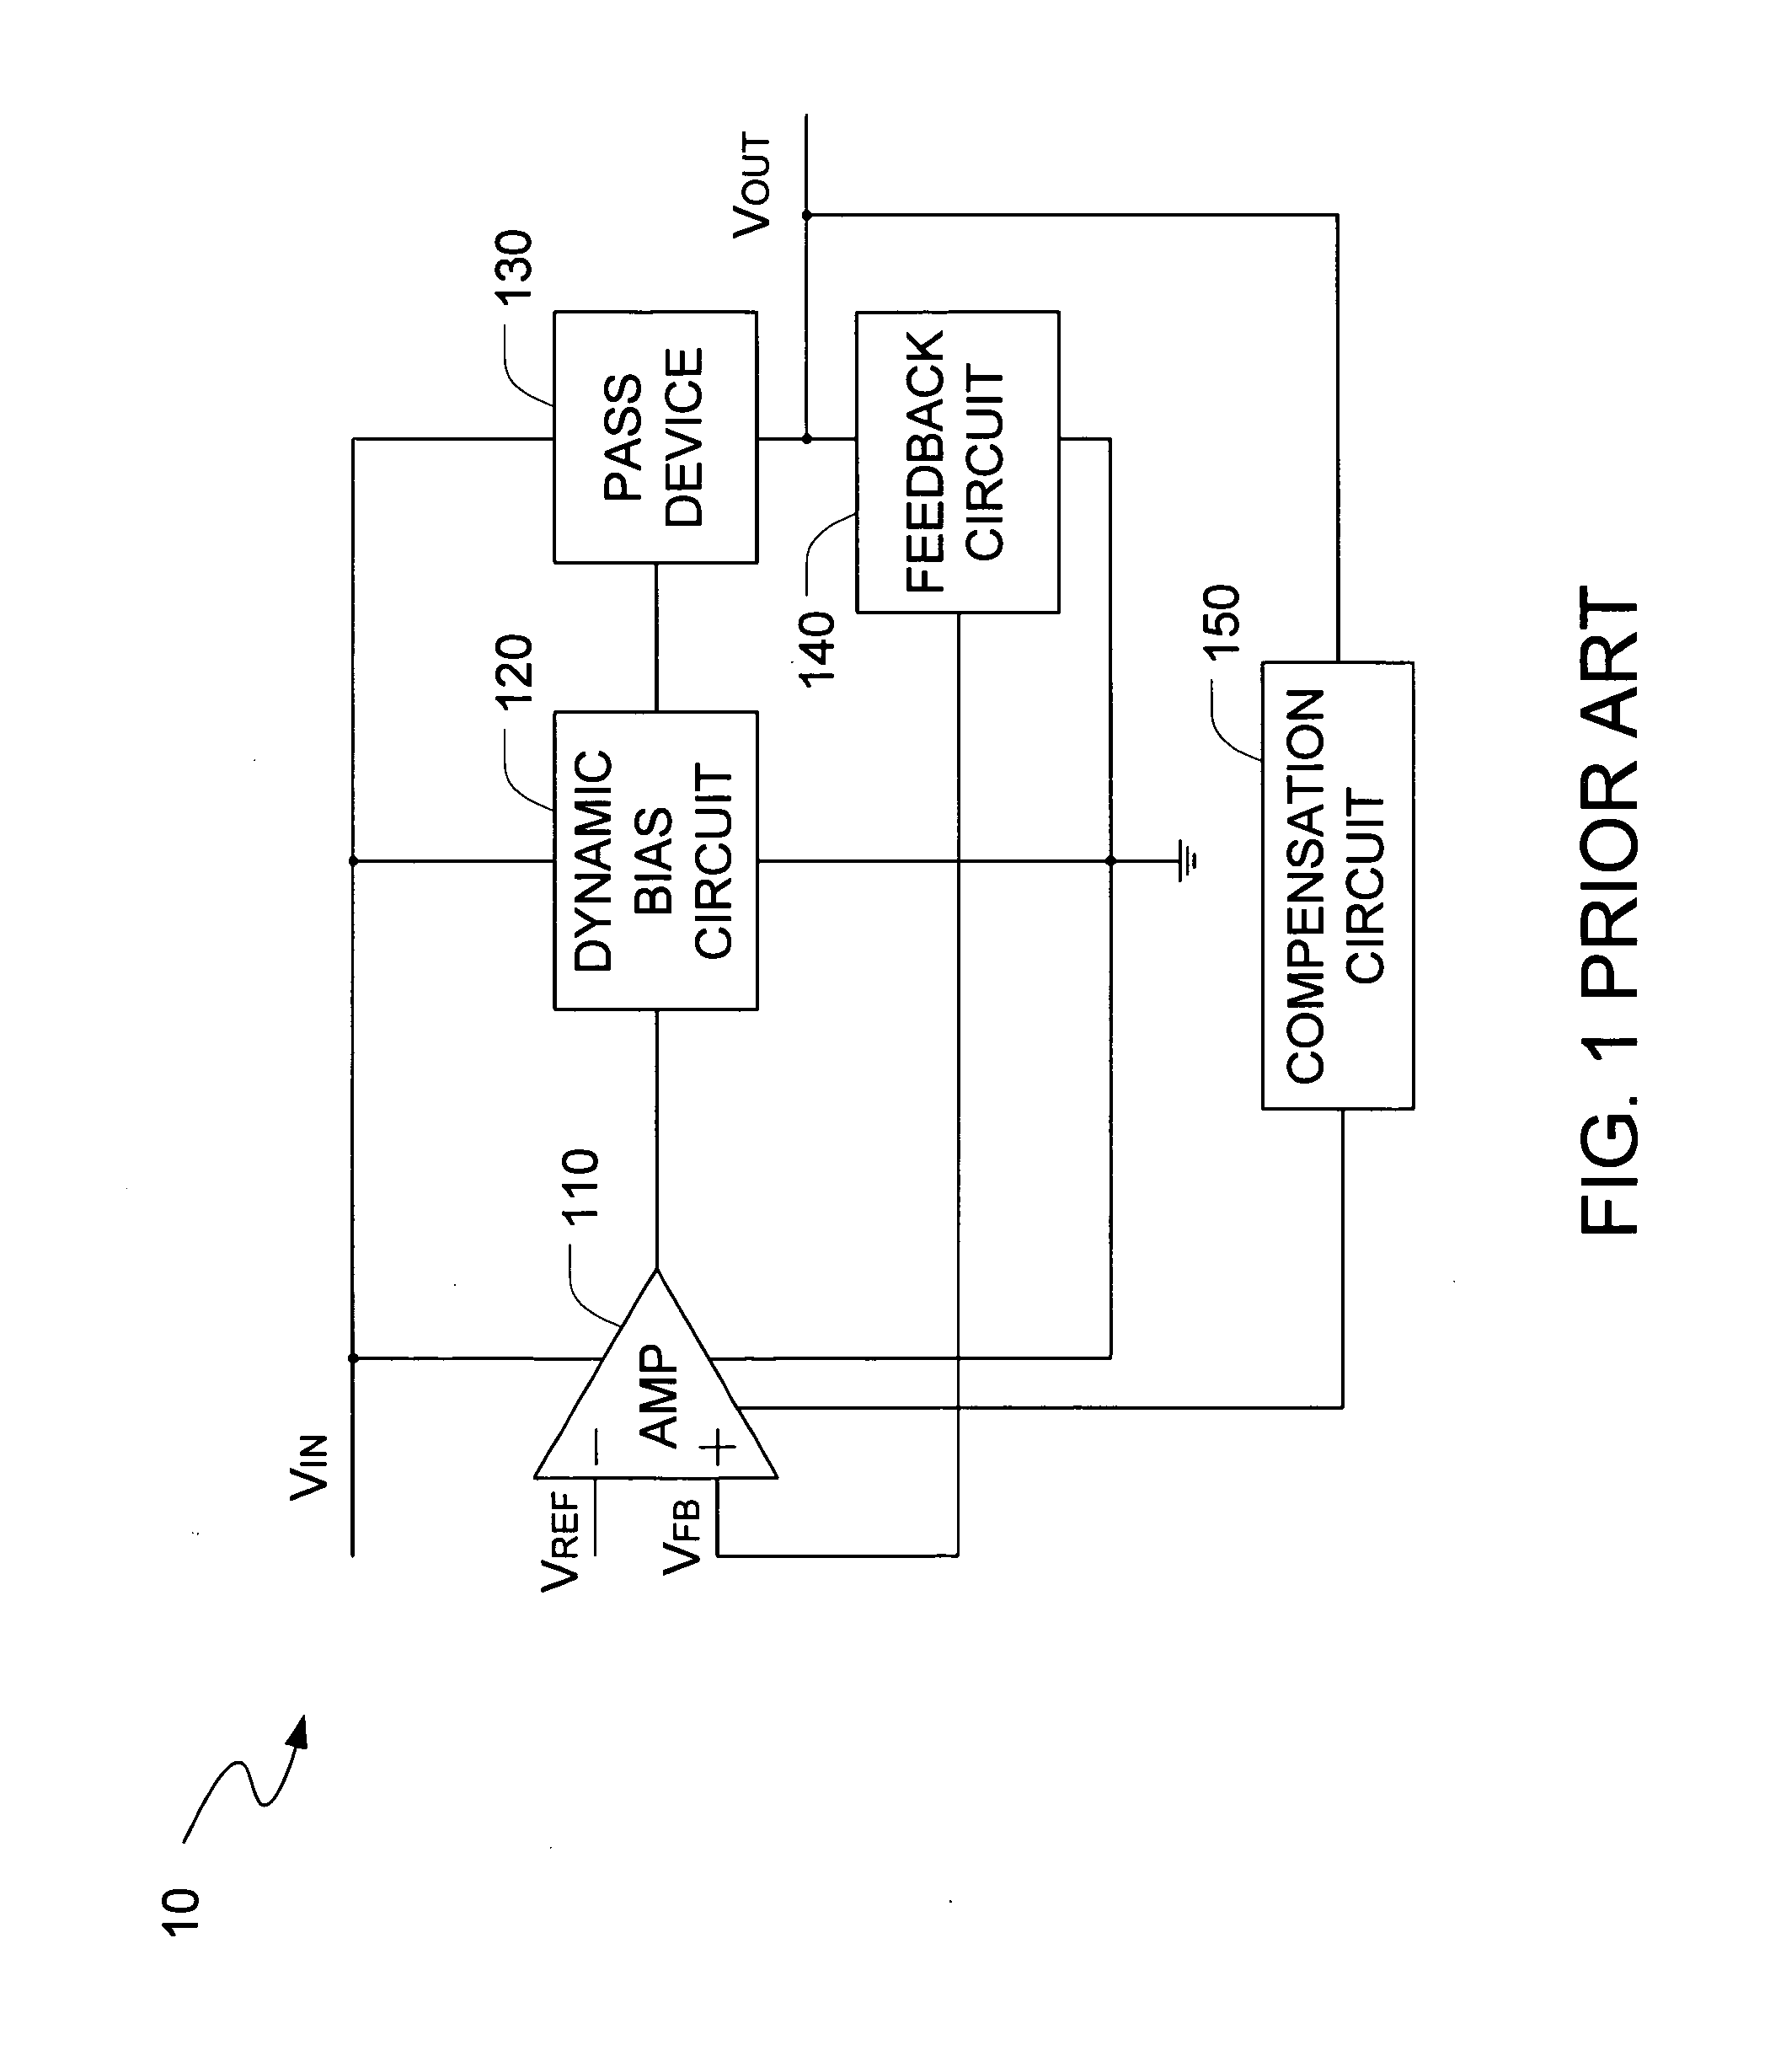 Low drop-out voltage regulator with enhanced frequency compensation